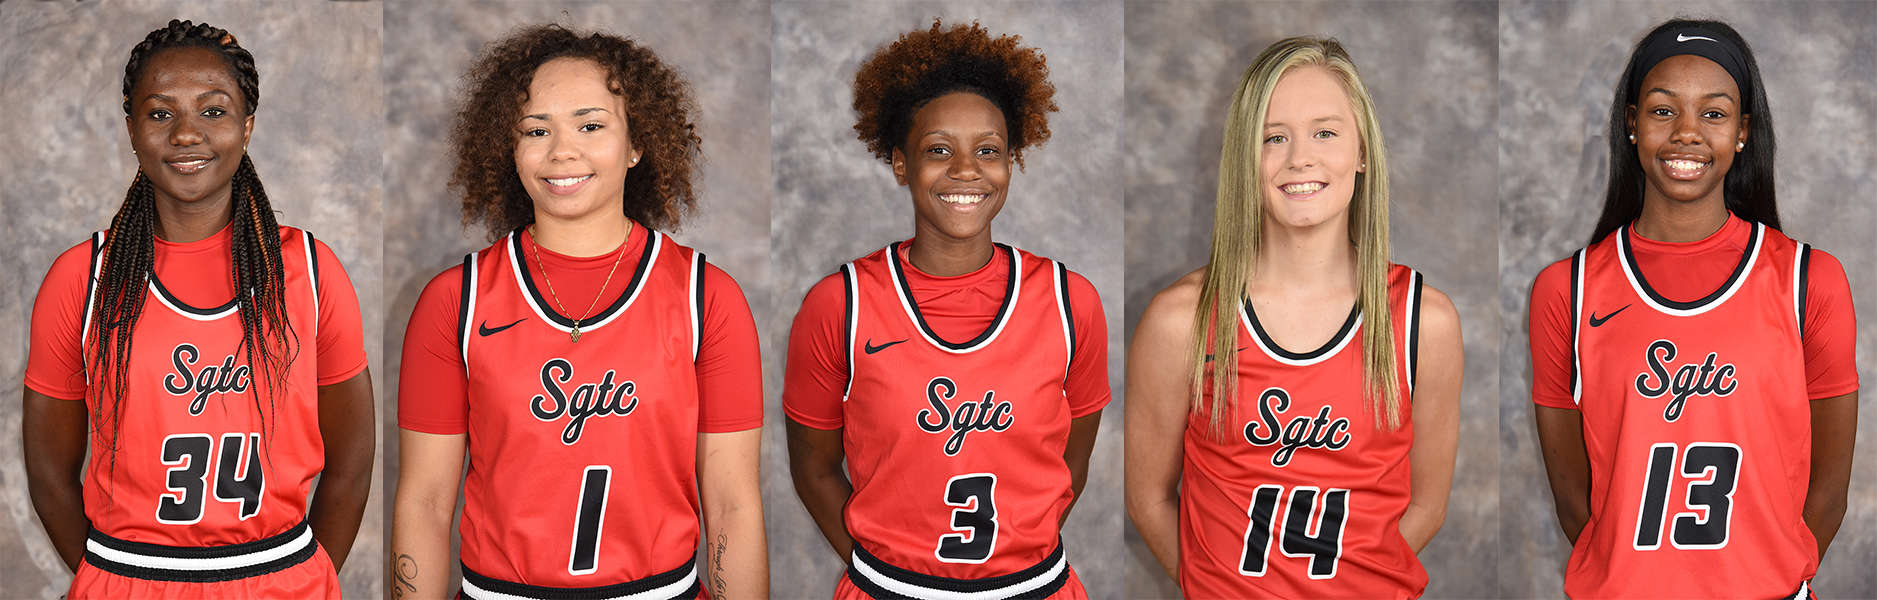 Five Lady Jets ranked in the NJCAA national statistics for rebounds, field goal percentage shooting, assists, and steals. Shown (l to r) are Femme Sikuzani (34), Shamari Tyson (1), Niya Goudelock (3), and Anna McKendree (14) and Yasriyyah Wazeerund-Din (13). The Lady Jets are currently ranked 19th in the nation.